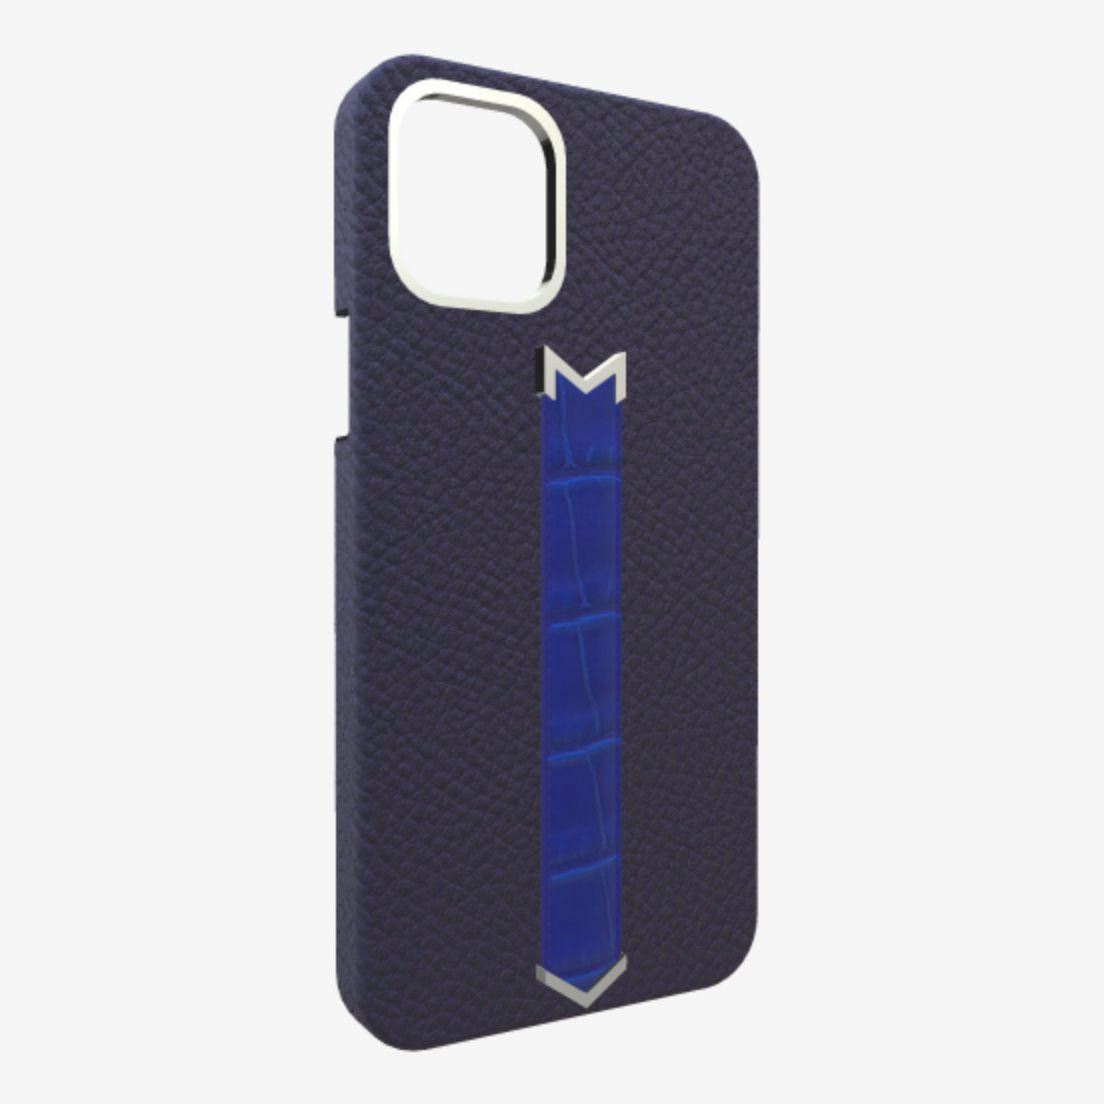 Silver Finger Strap Case for iPhone 13 Pro Max in Genuine Calfskin and Alligator Navy-Blue Electric-Blue 